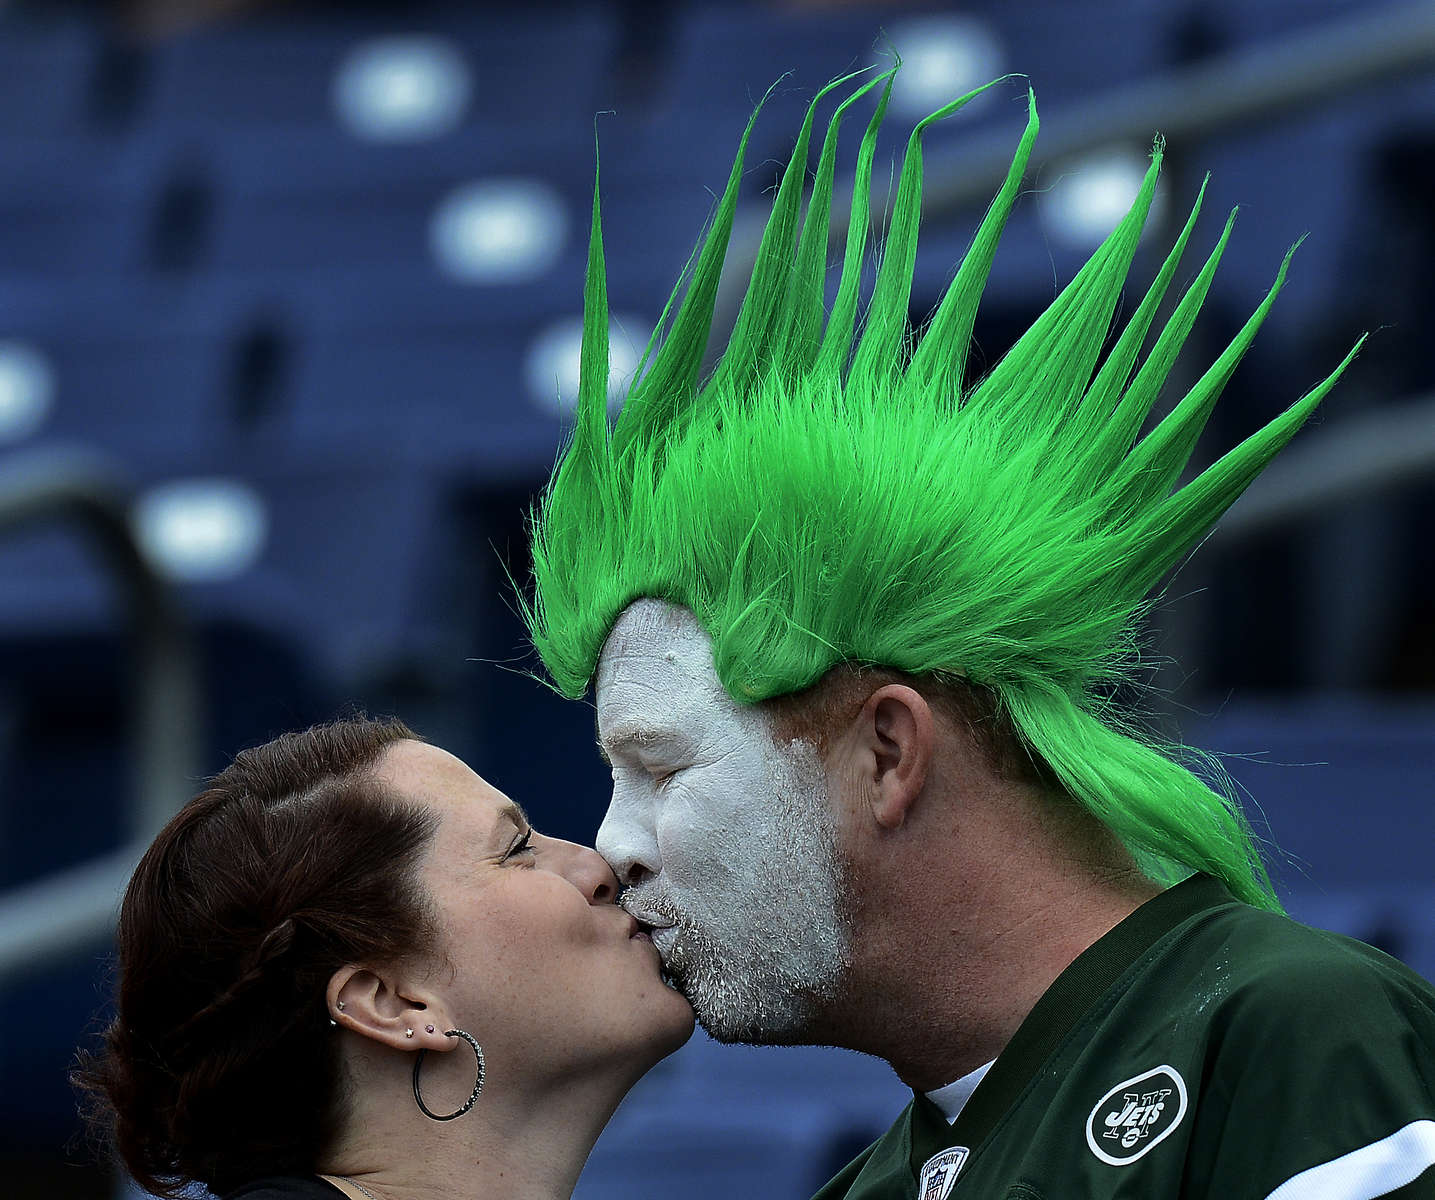 New York Jets fans Ana Hall and Rick Martin kiss as they watch players warm up before an NFL football game between the Jets and the Tennessee Titans on Sept. 29, 2013, in Nashville, Tenn. (AP Photo/ Mark Zaleski)